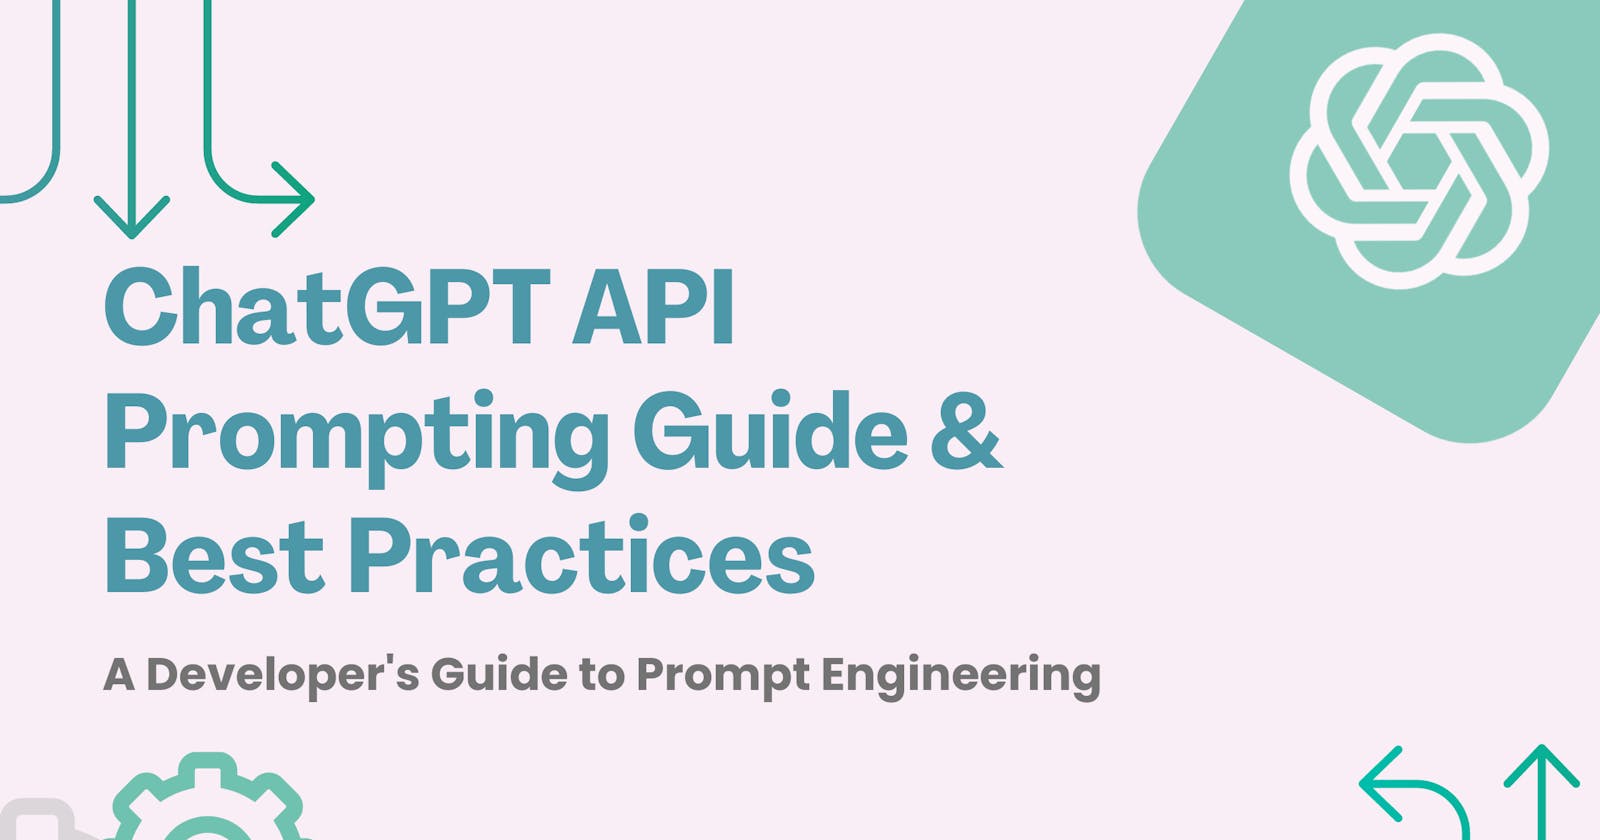 ChatGPT API Prompting Guide & Best Practices